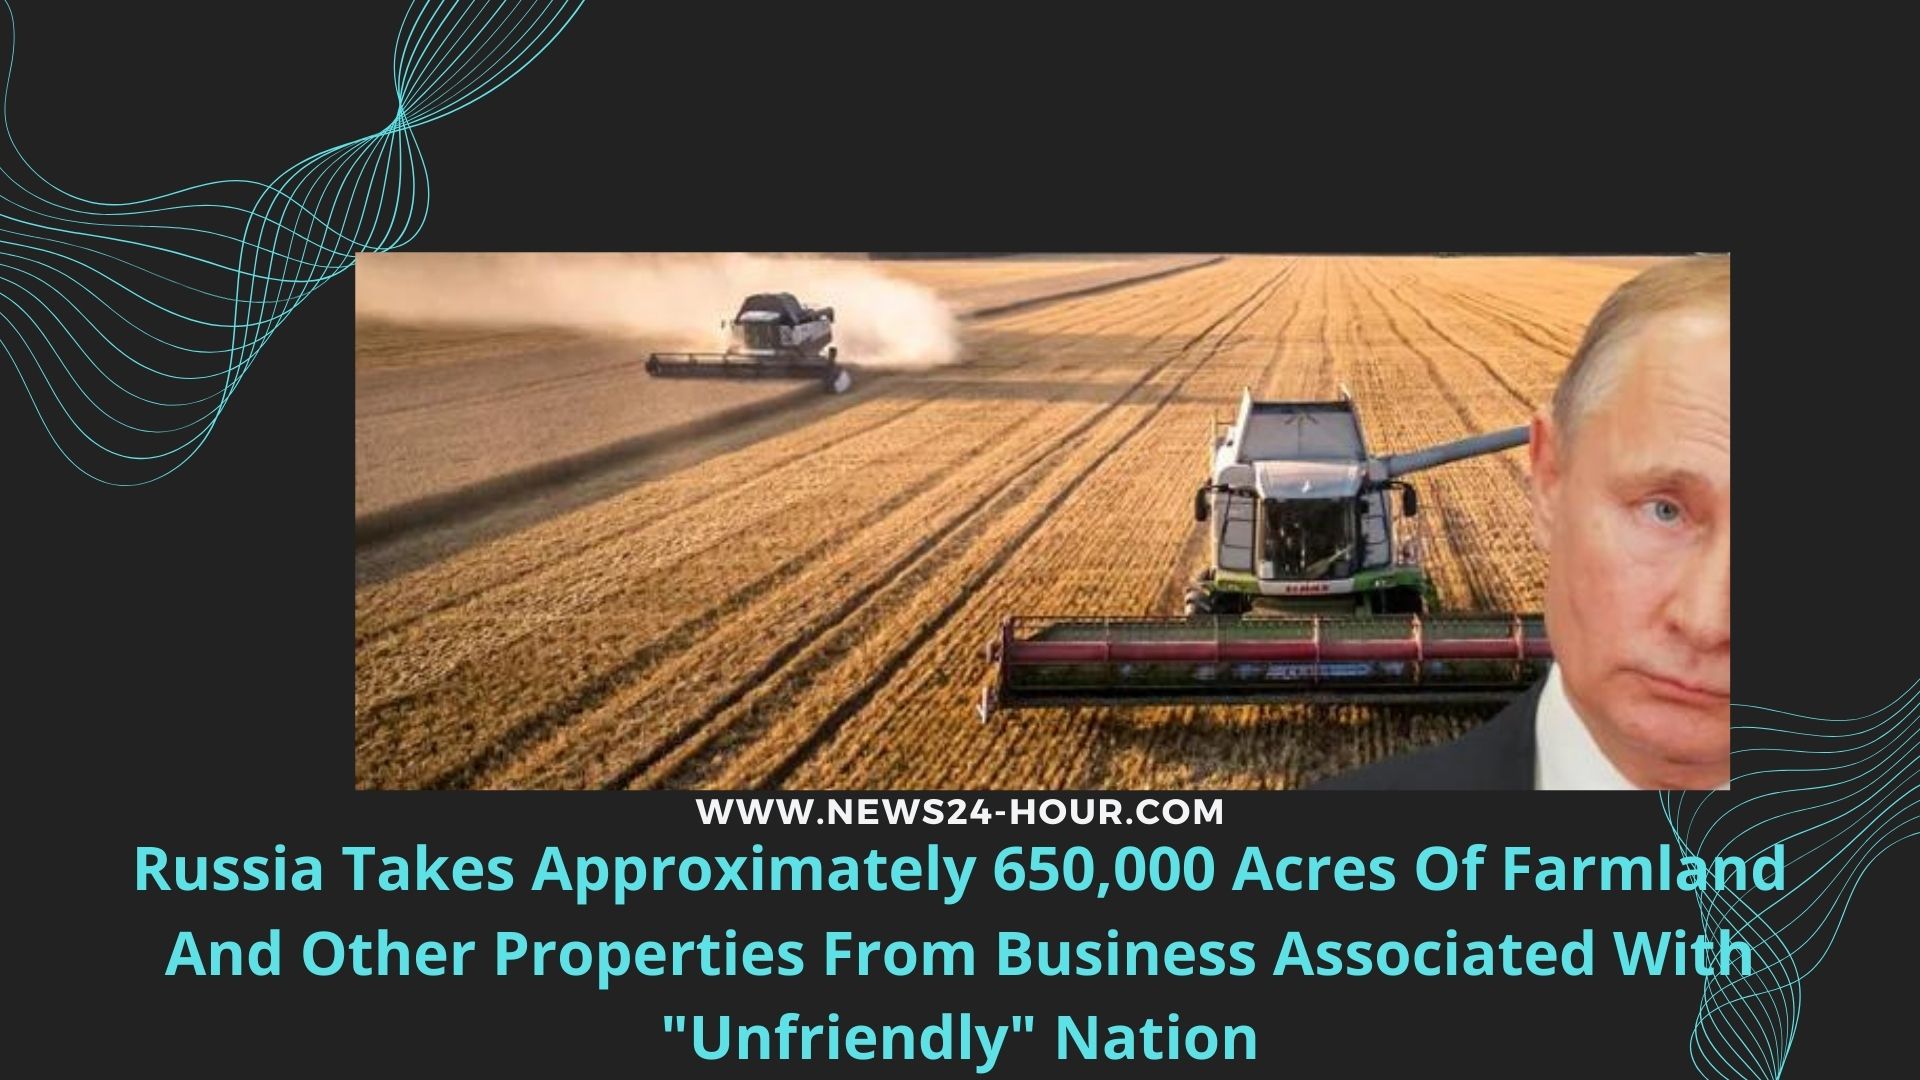 You are currently viewing Russia Takes Approximately 650,000 Acres Of Farmland And Other Properties From Business Associated With “Unfriendly” Nation